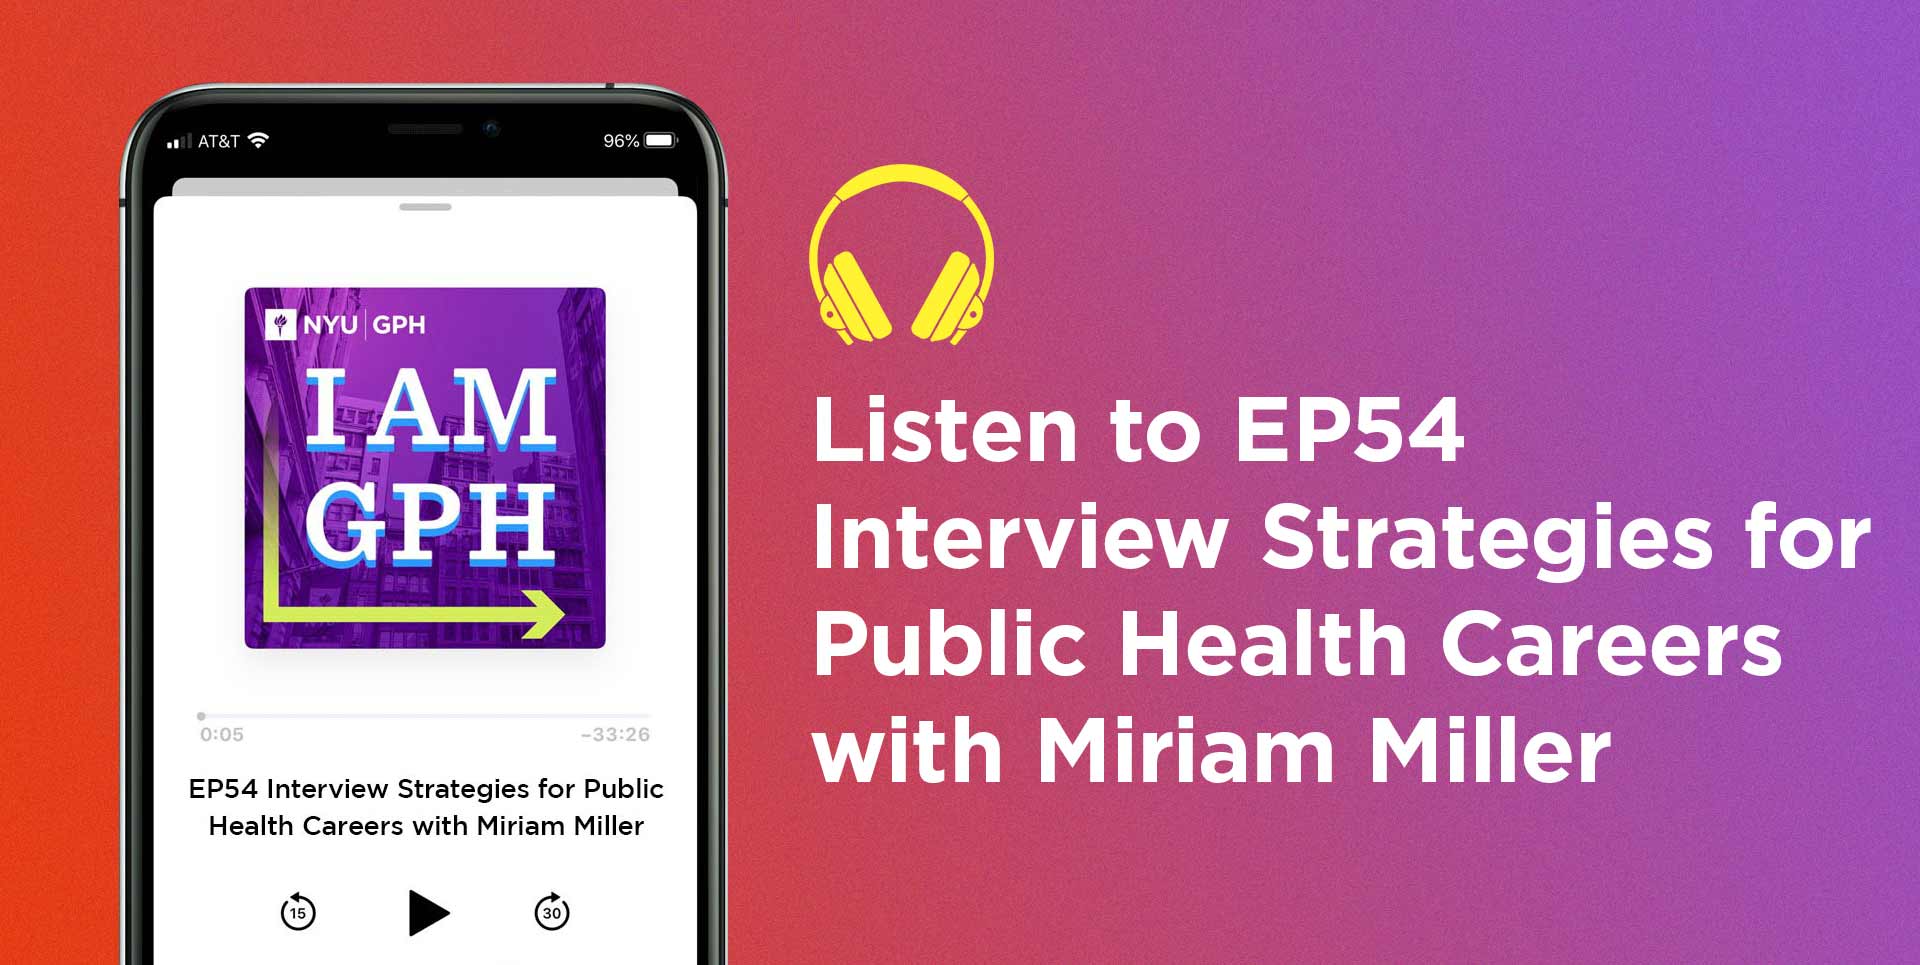 Listen to EP54 Interview Strategies for Public Health Careers with Miriam Miller